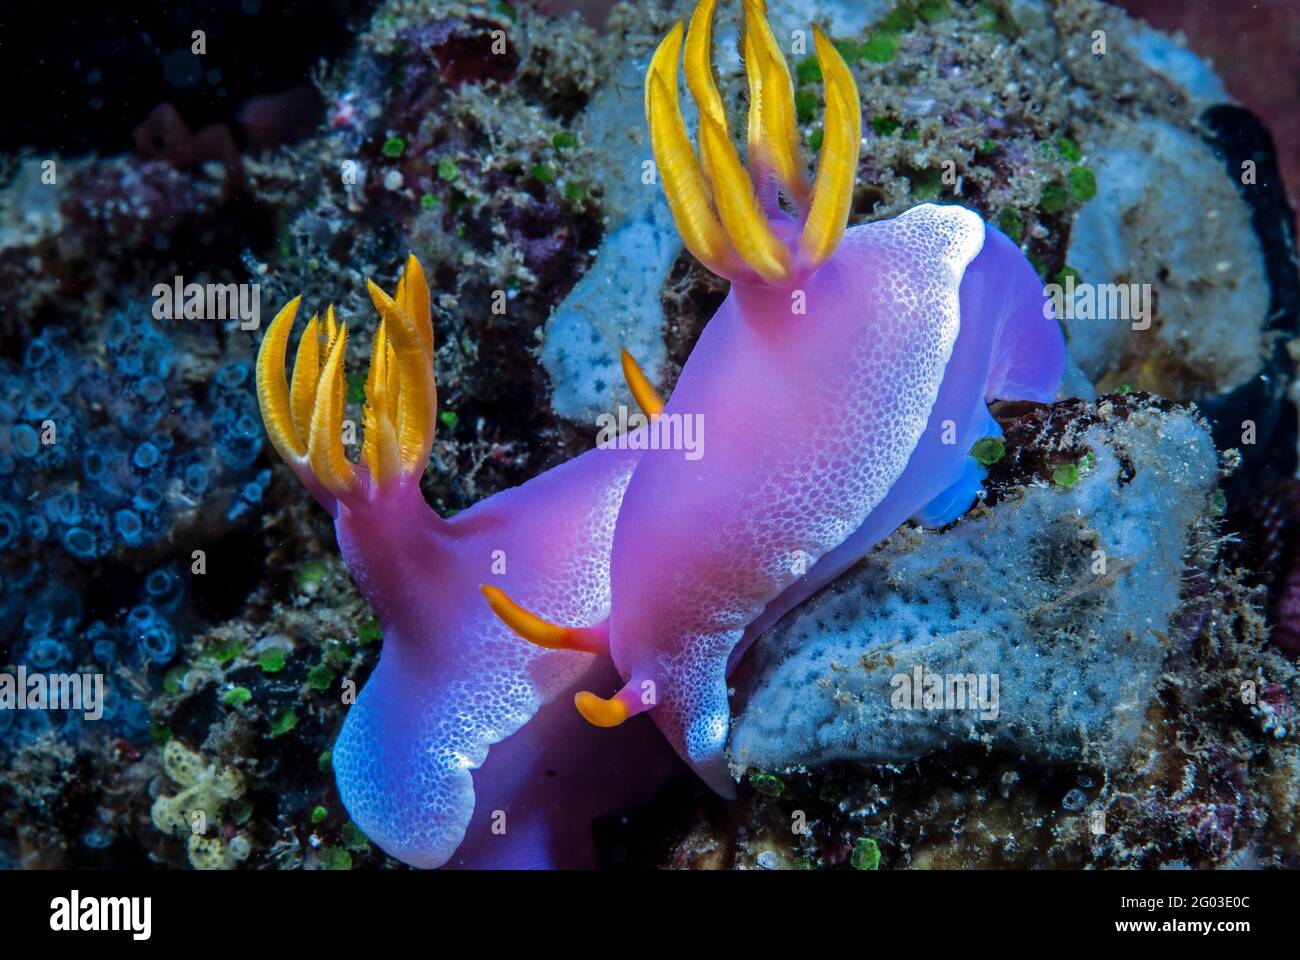 Pair of lavender-colored nudibranchs, Lembeh Strait, Sulawesi, Indonesia Stock Photo